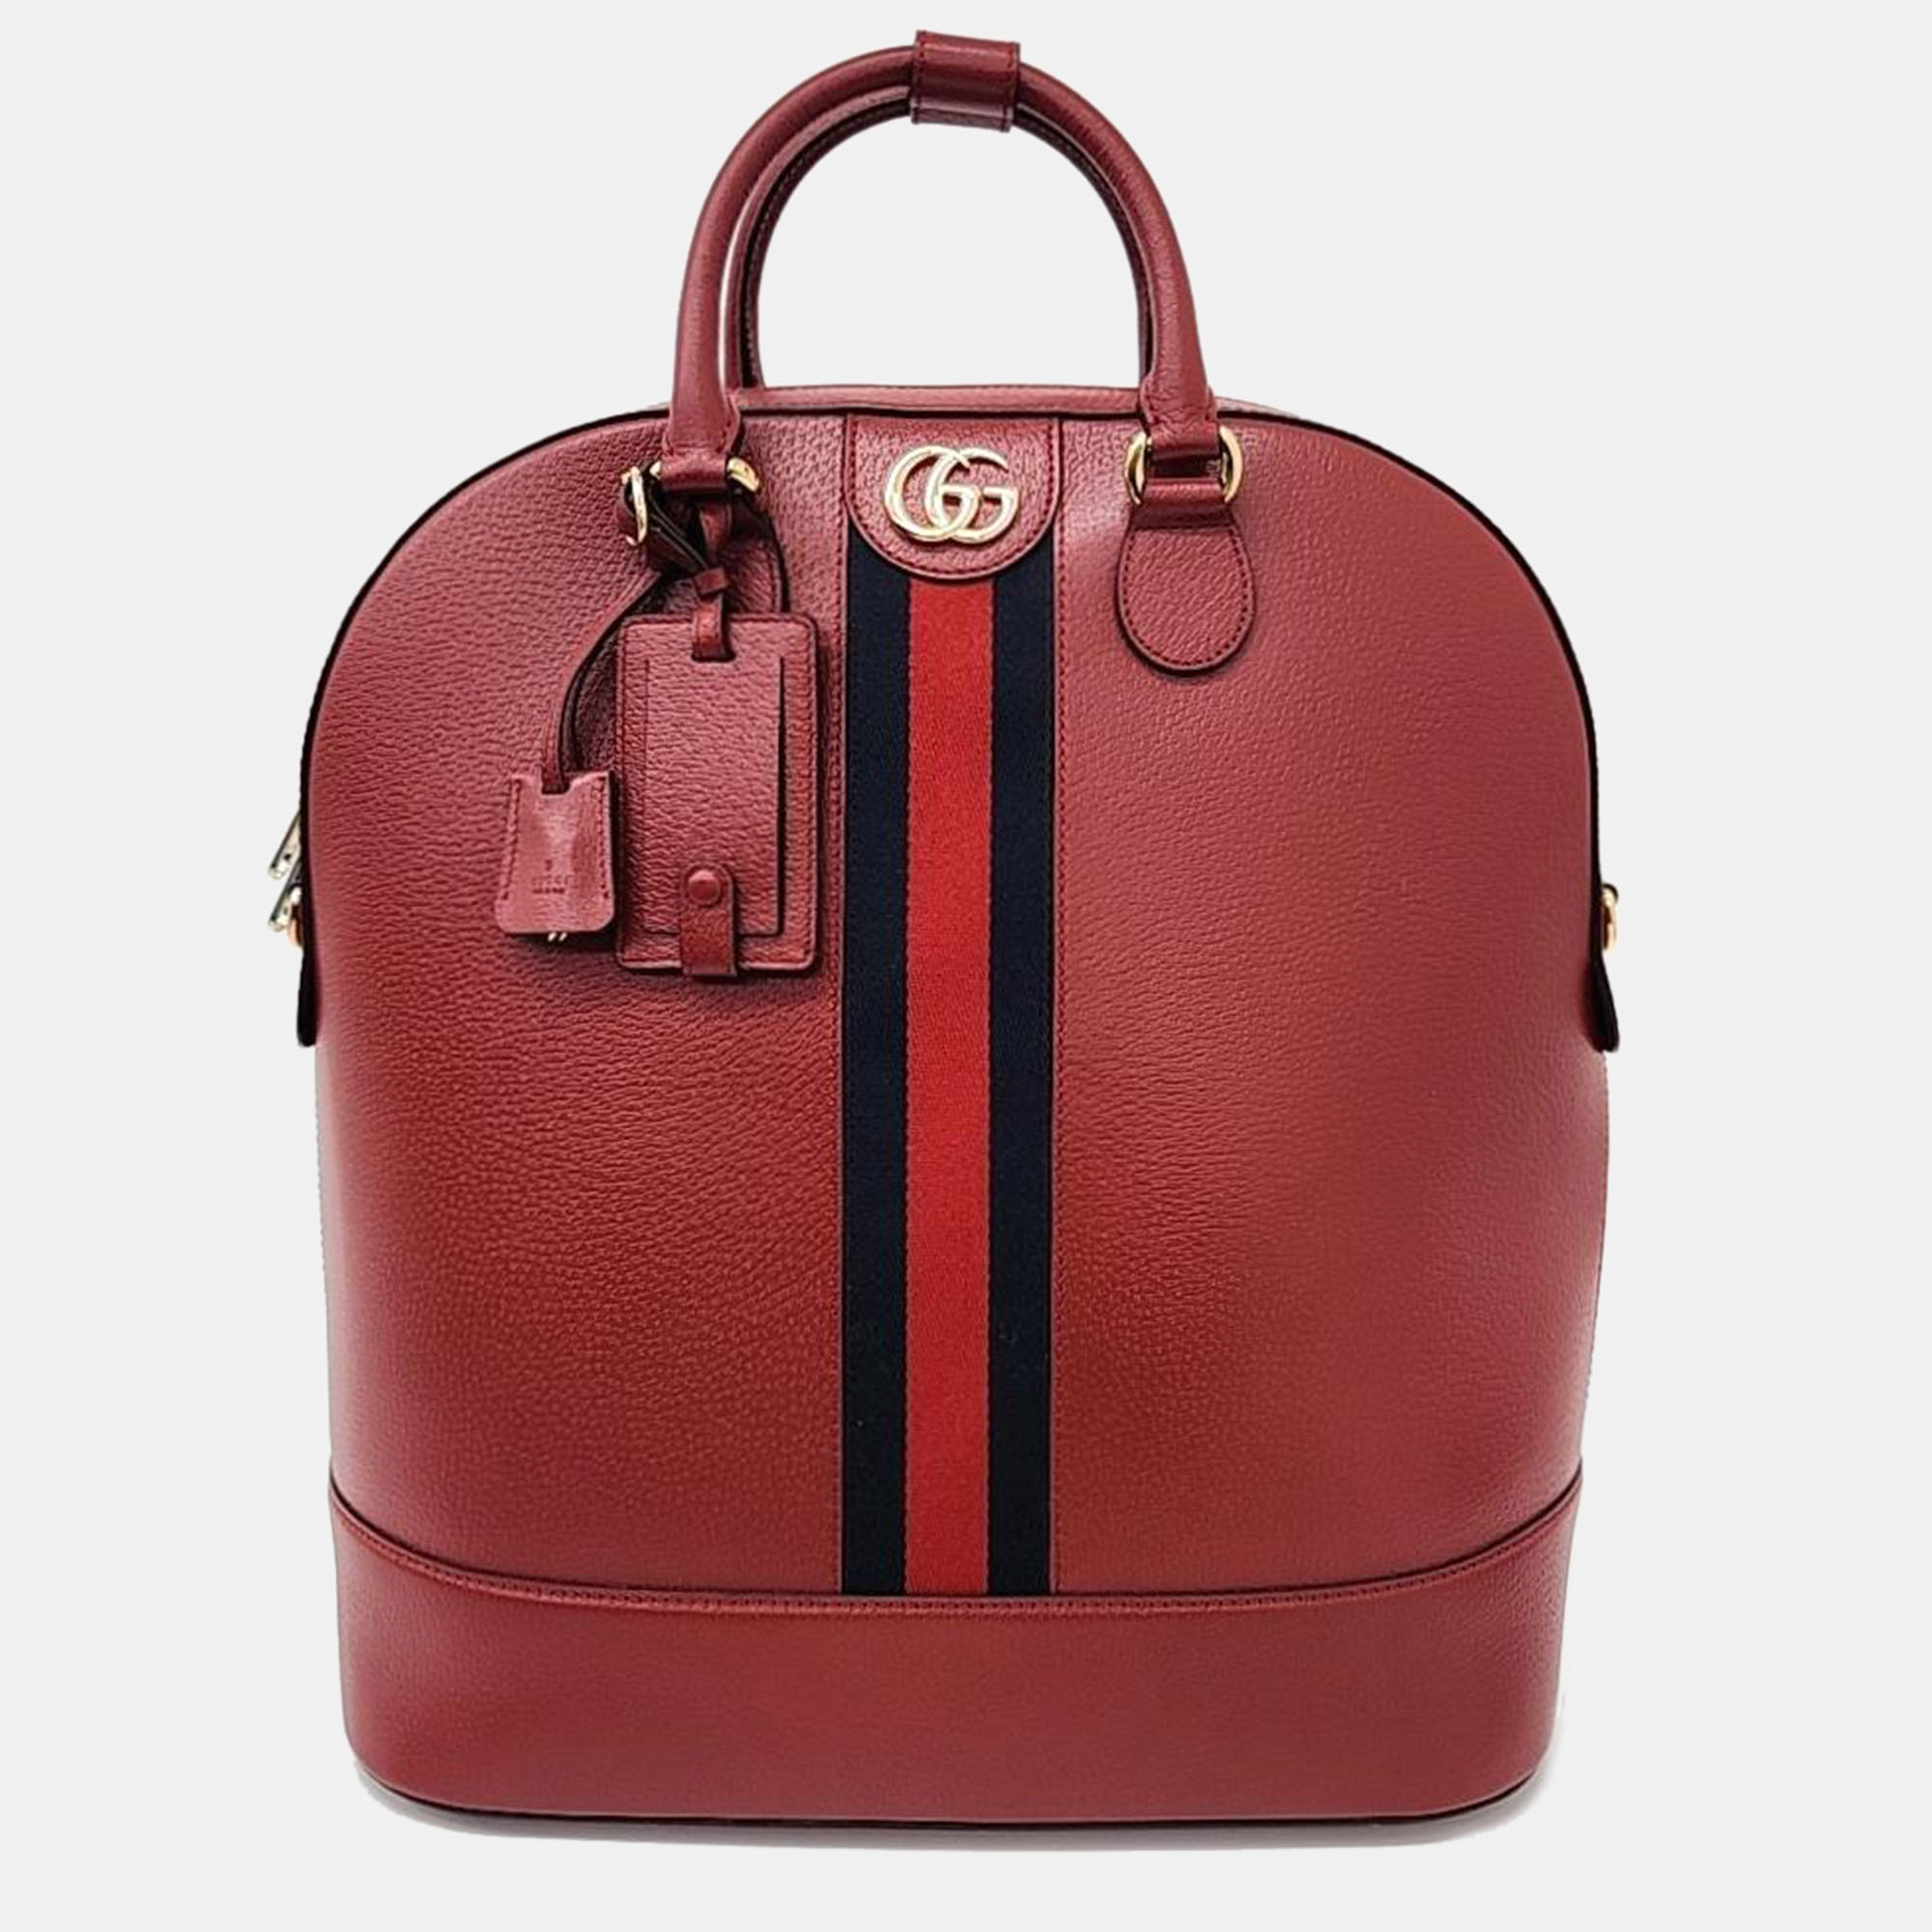 Gucci leather red sylvie bowling bag